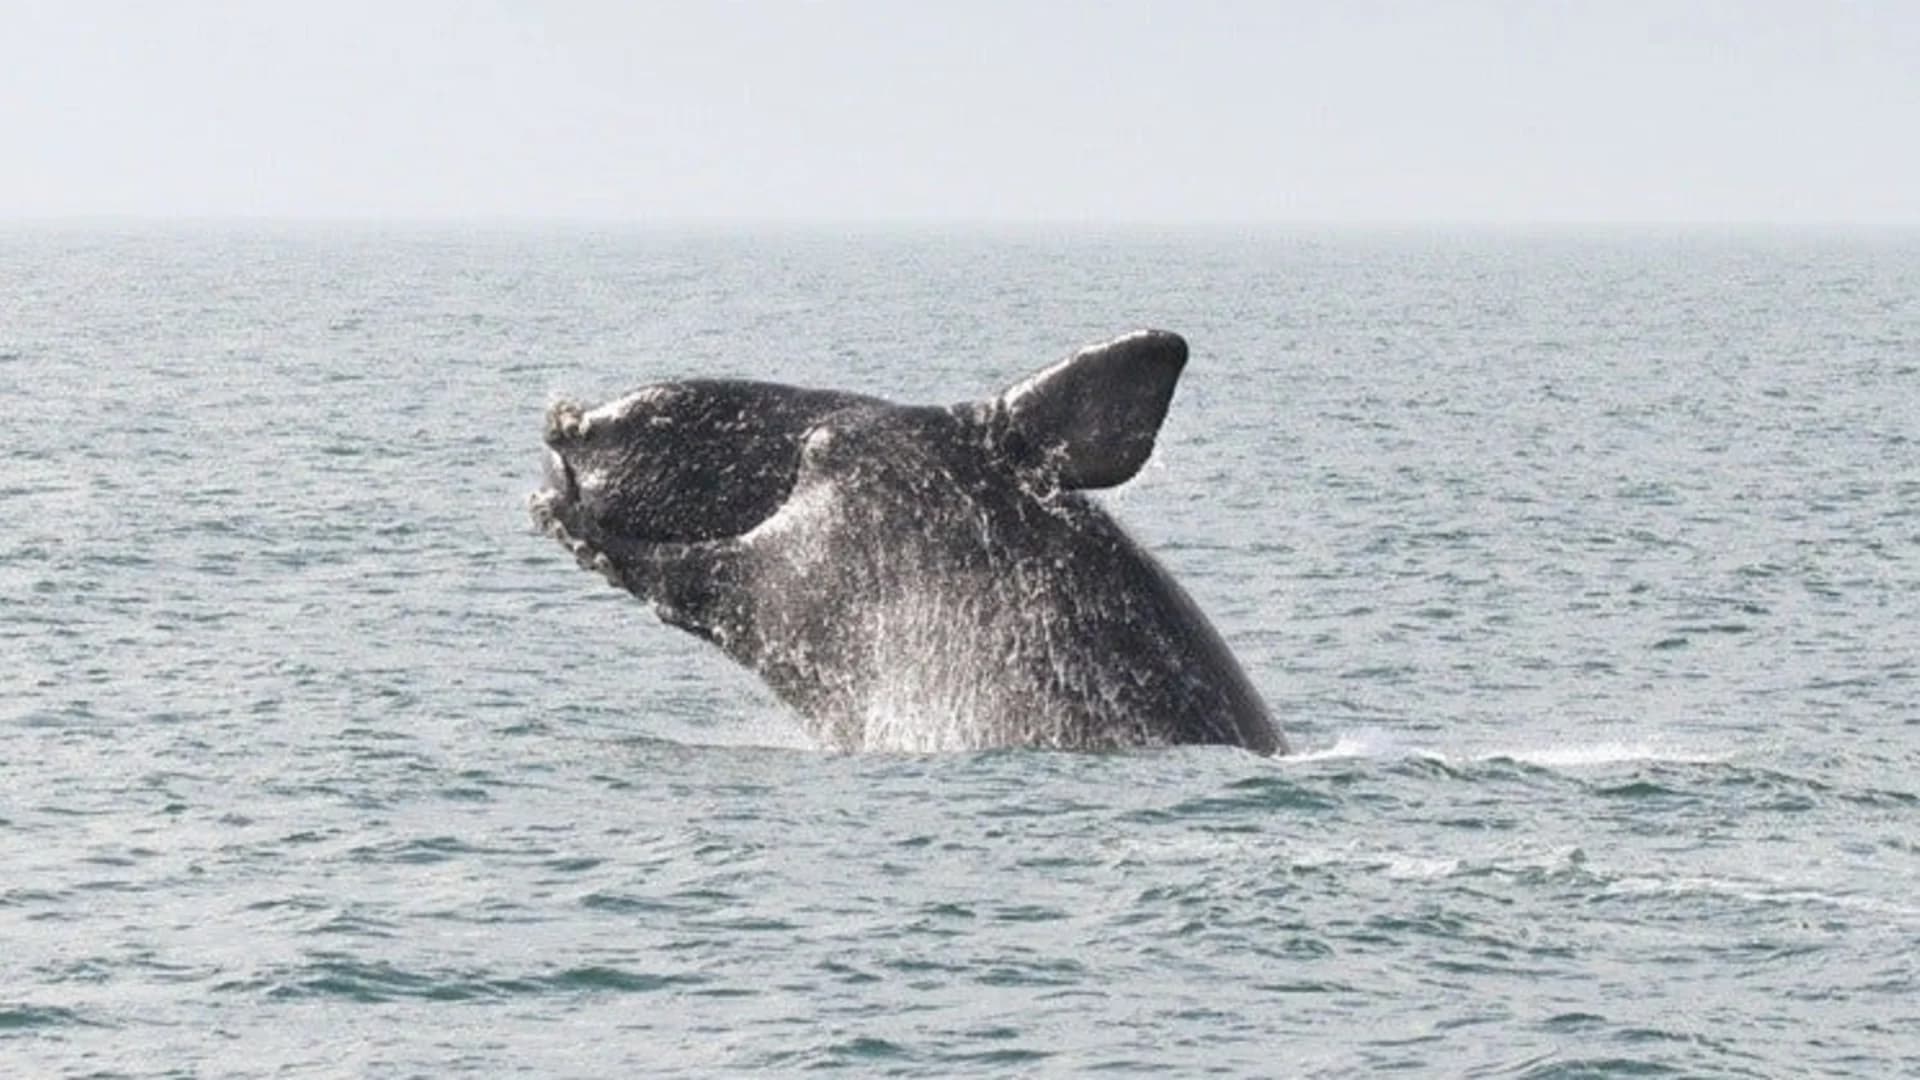 Senators call for urgent assessment of right whale deaths